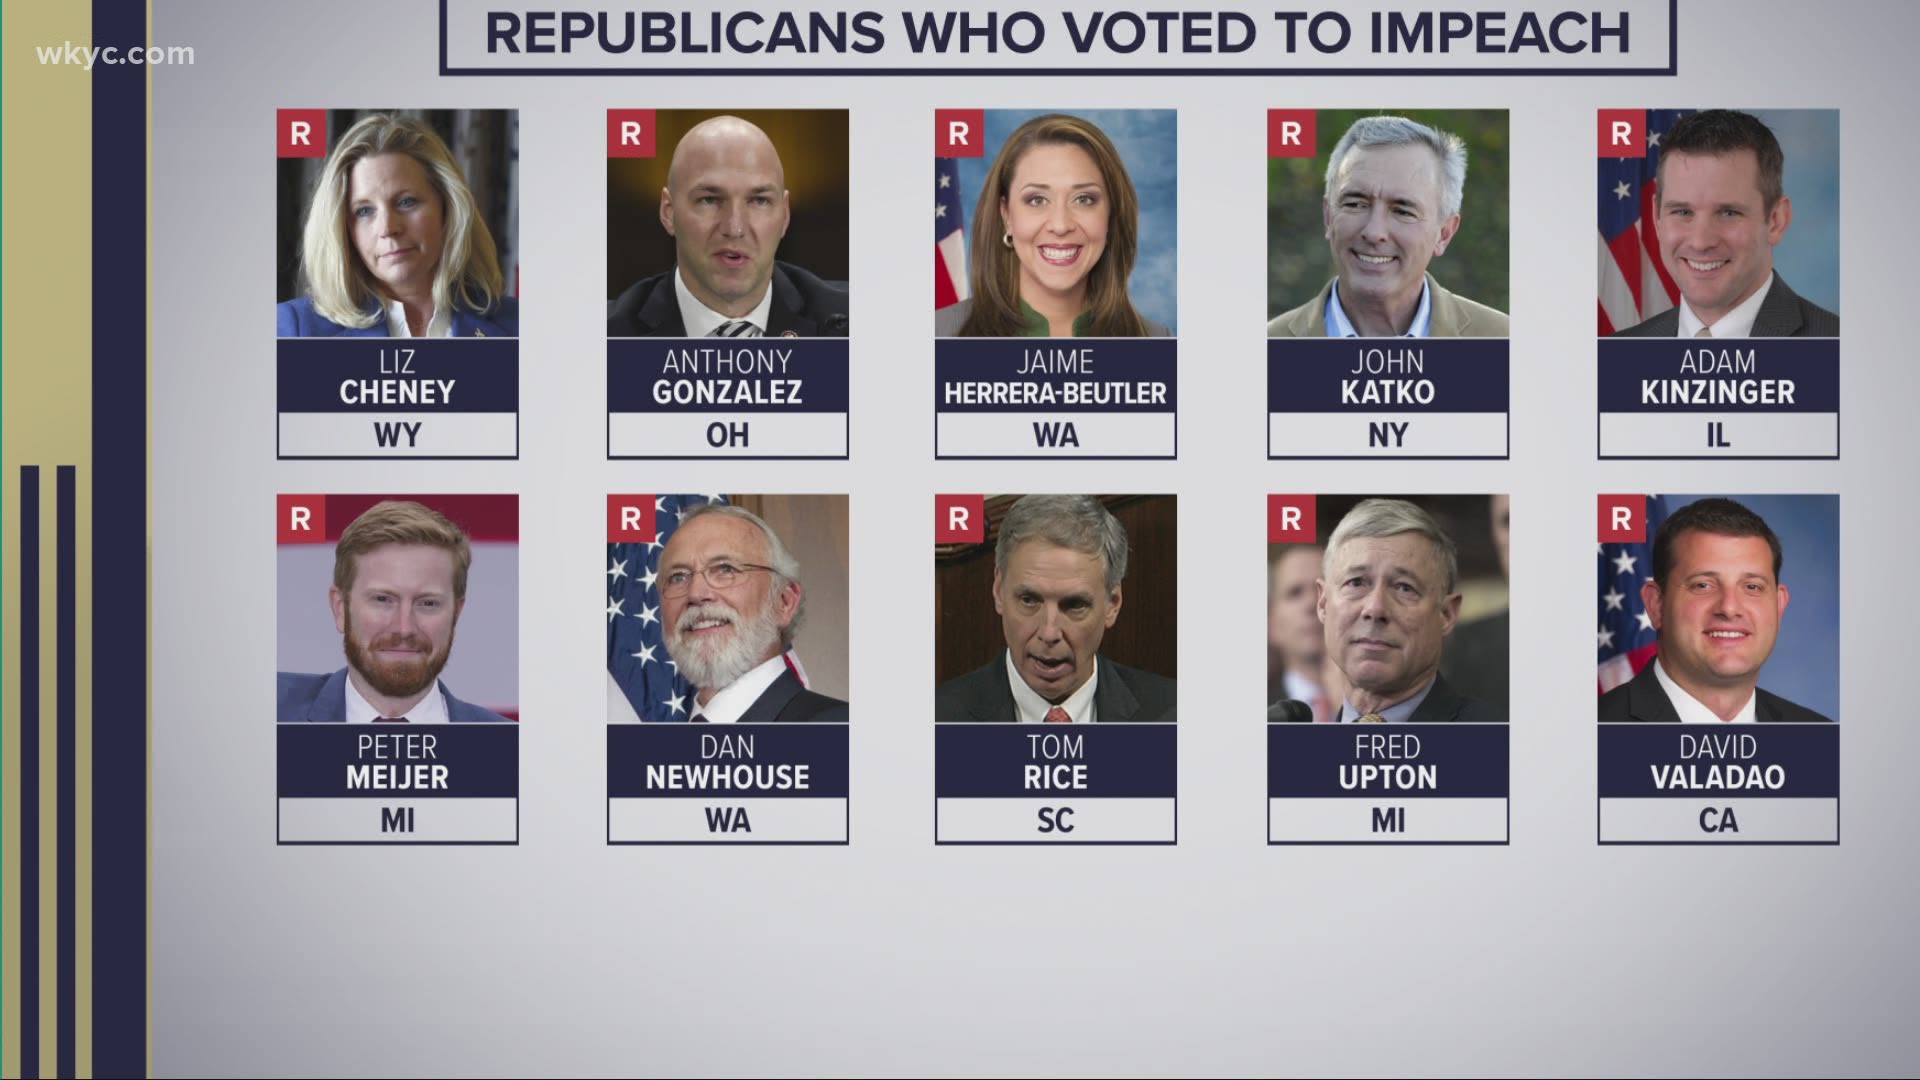 Ohio Rep. Anthony Gonzalez among 10 Republicans who voted to impeach ...